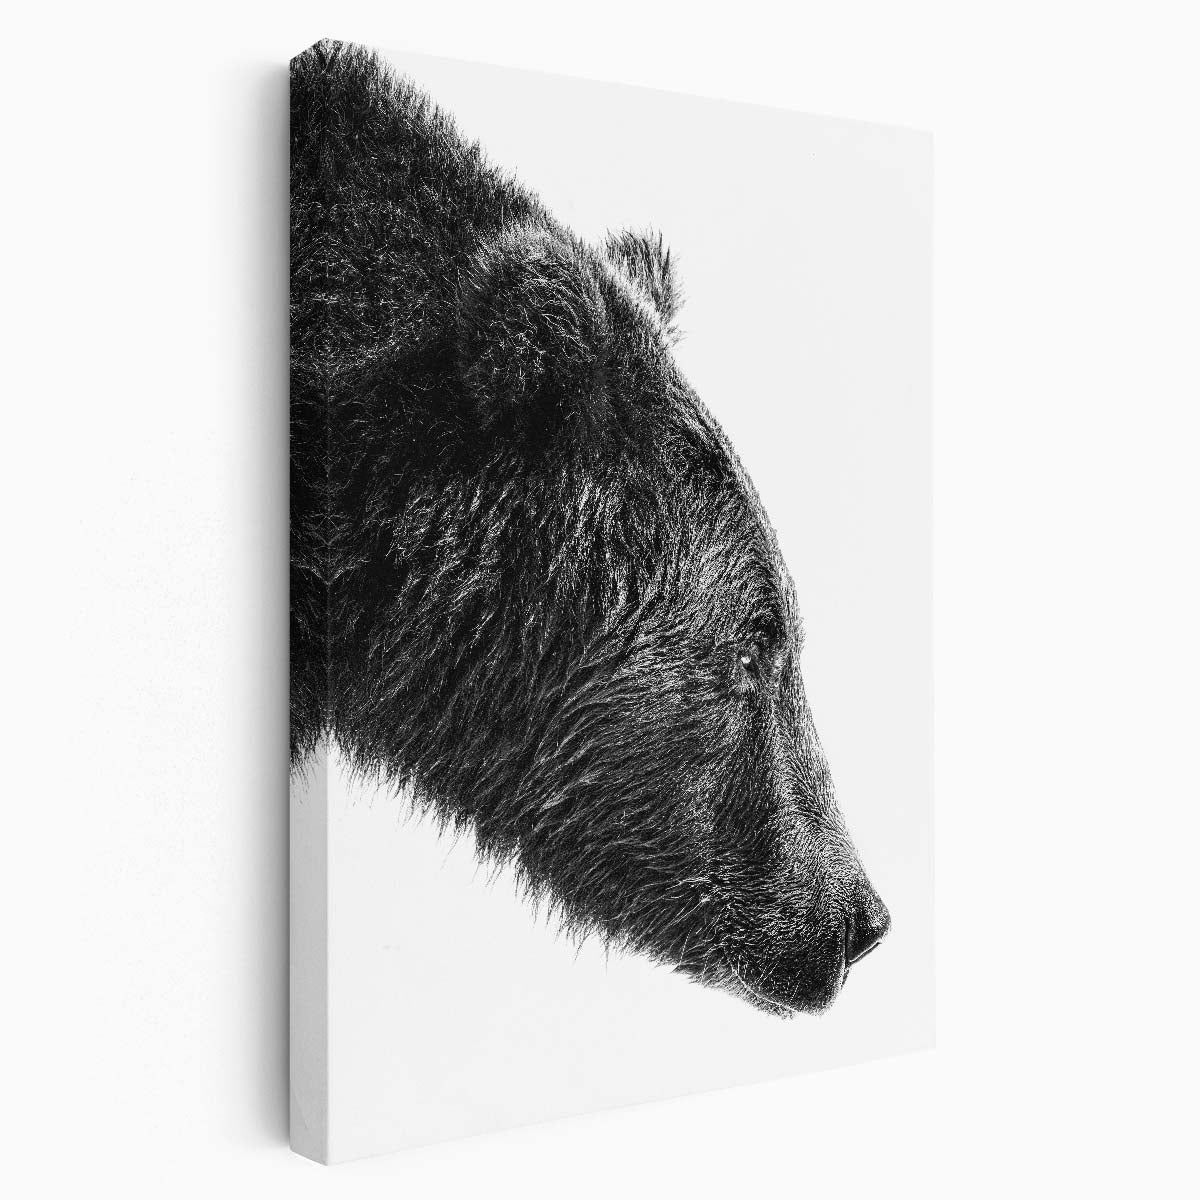 Katmai National Park Nature Bear Photography - Monochrome Portrait by Luxuriance Designs, made in USA